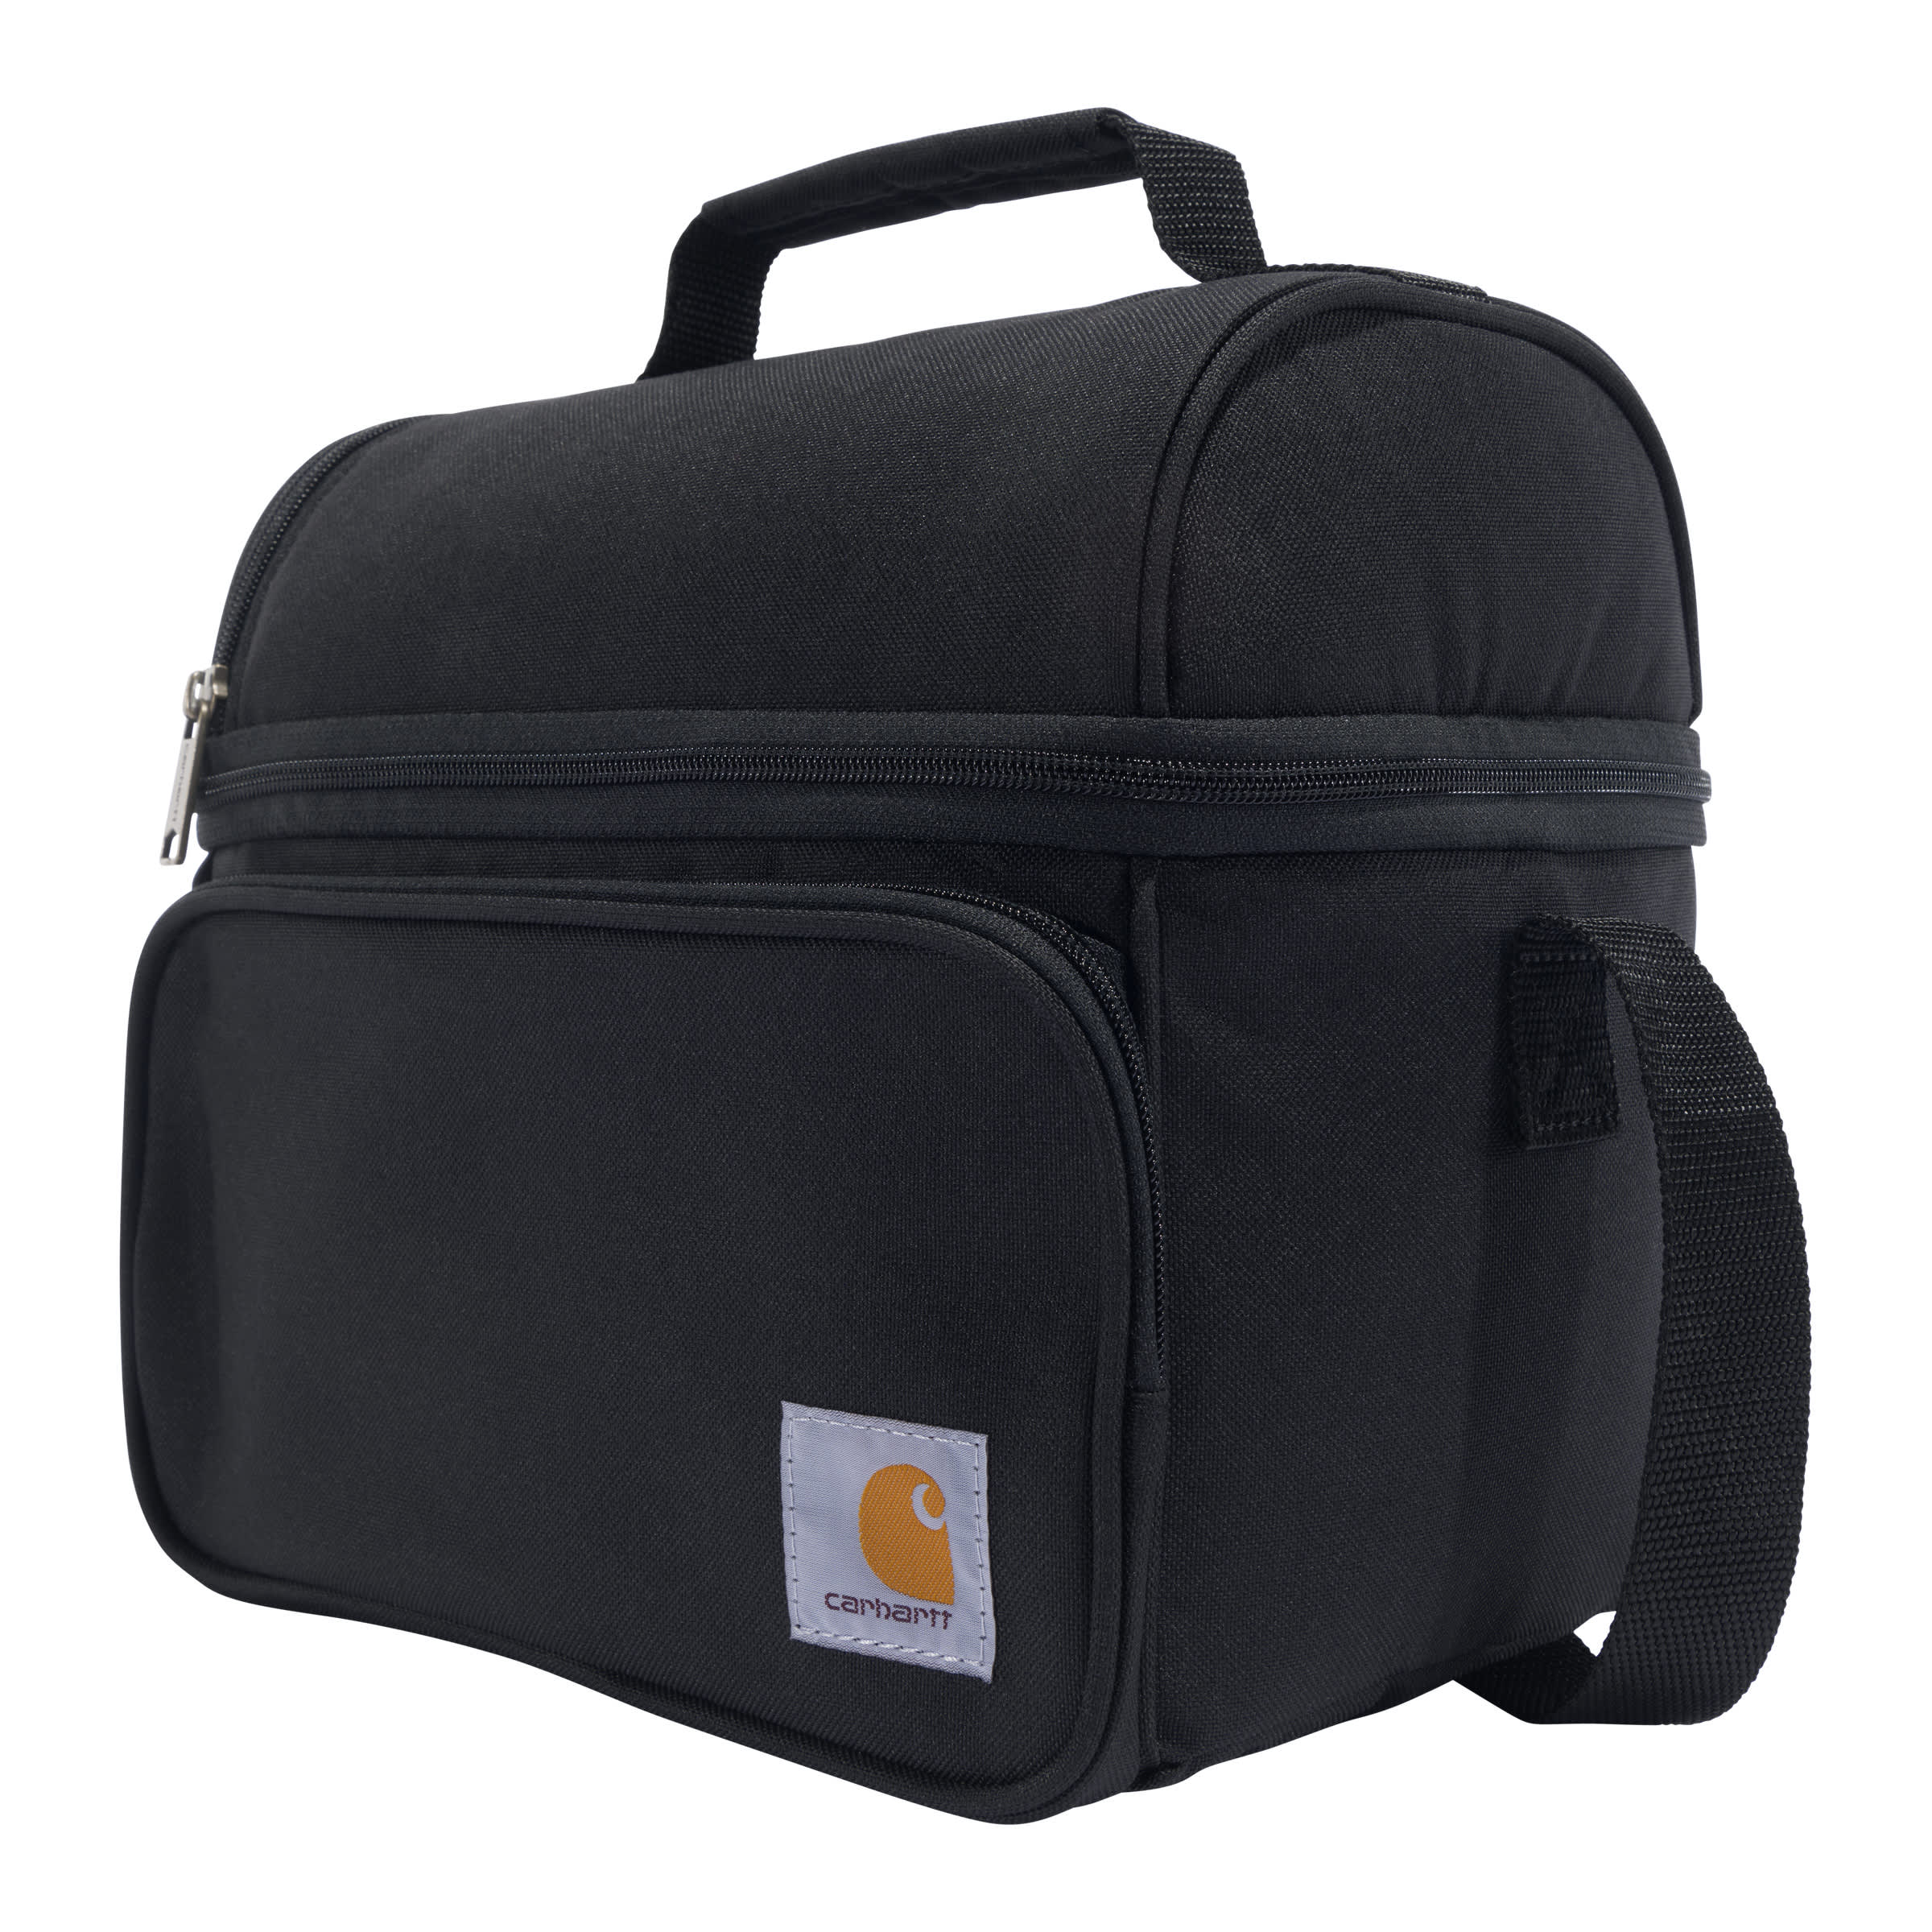 Carhartt® Insulated 12-Can 2-Compartment Lunch Cooler - Black